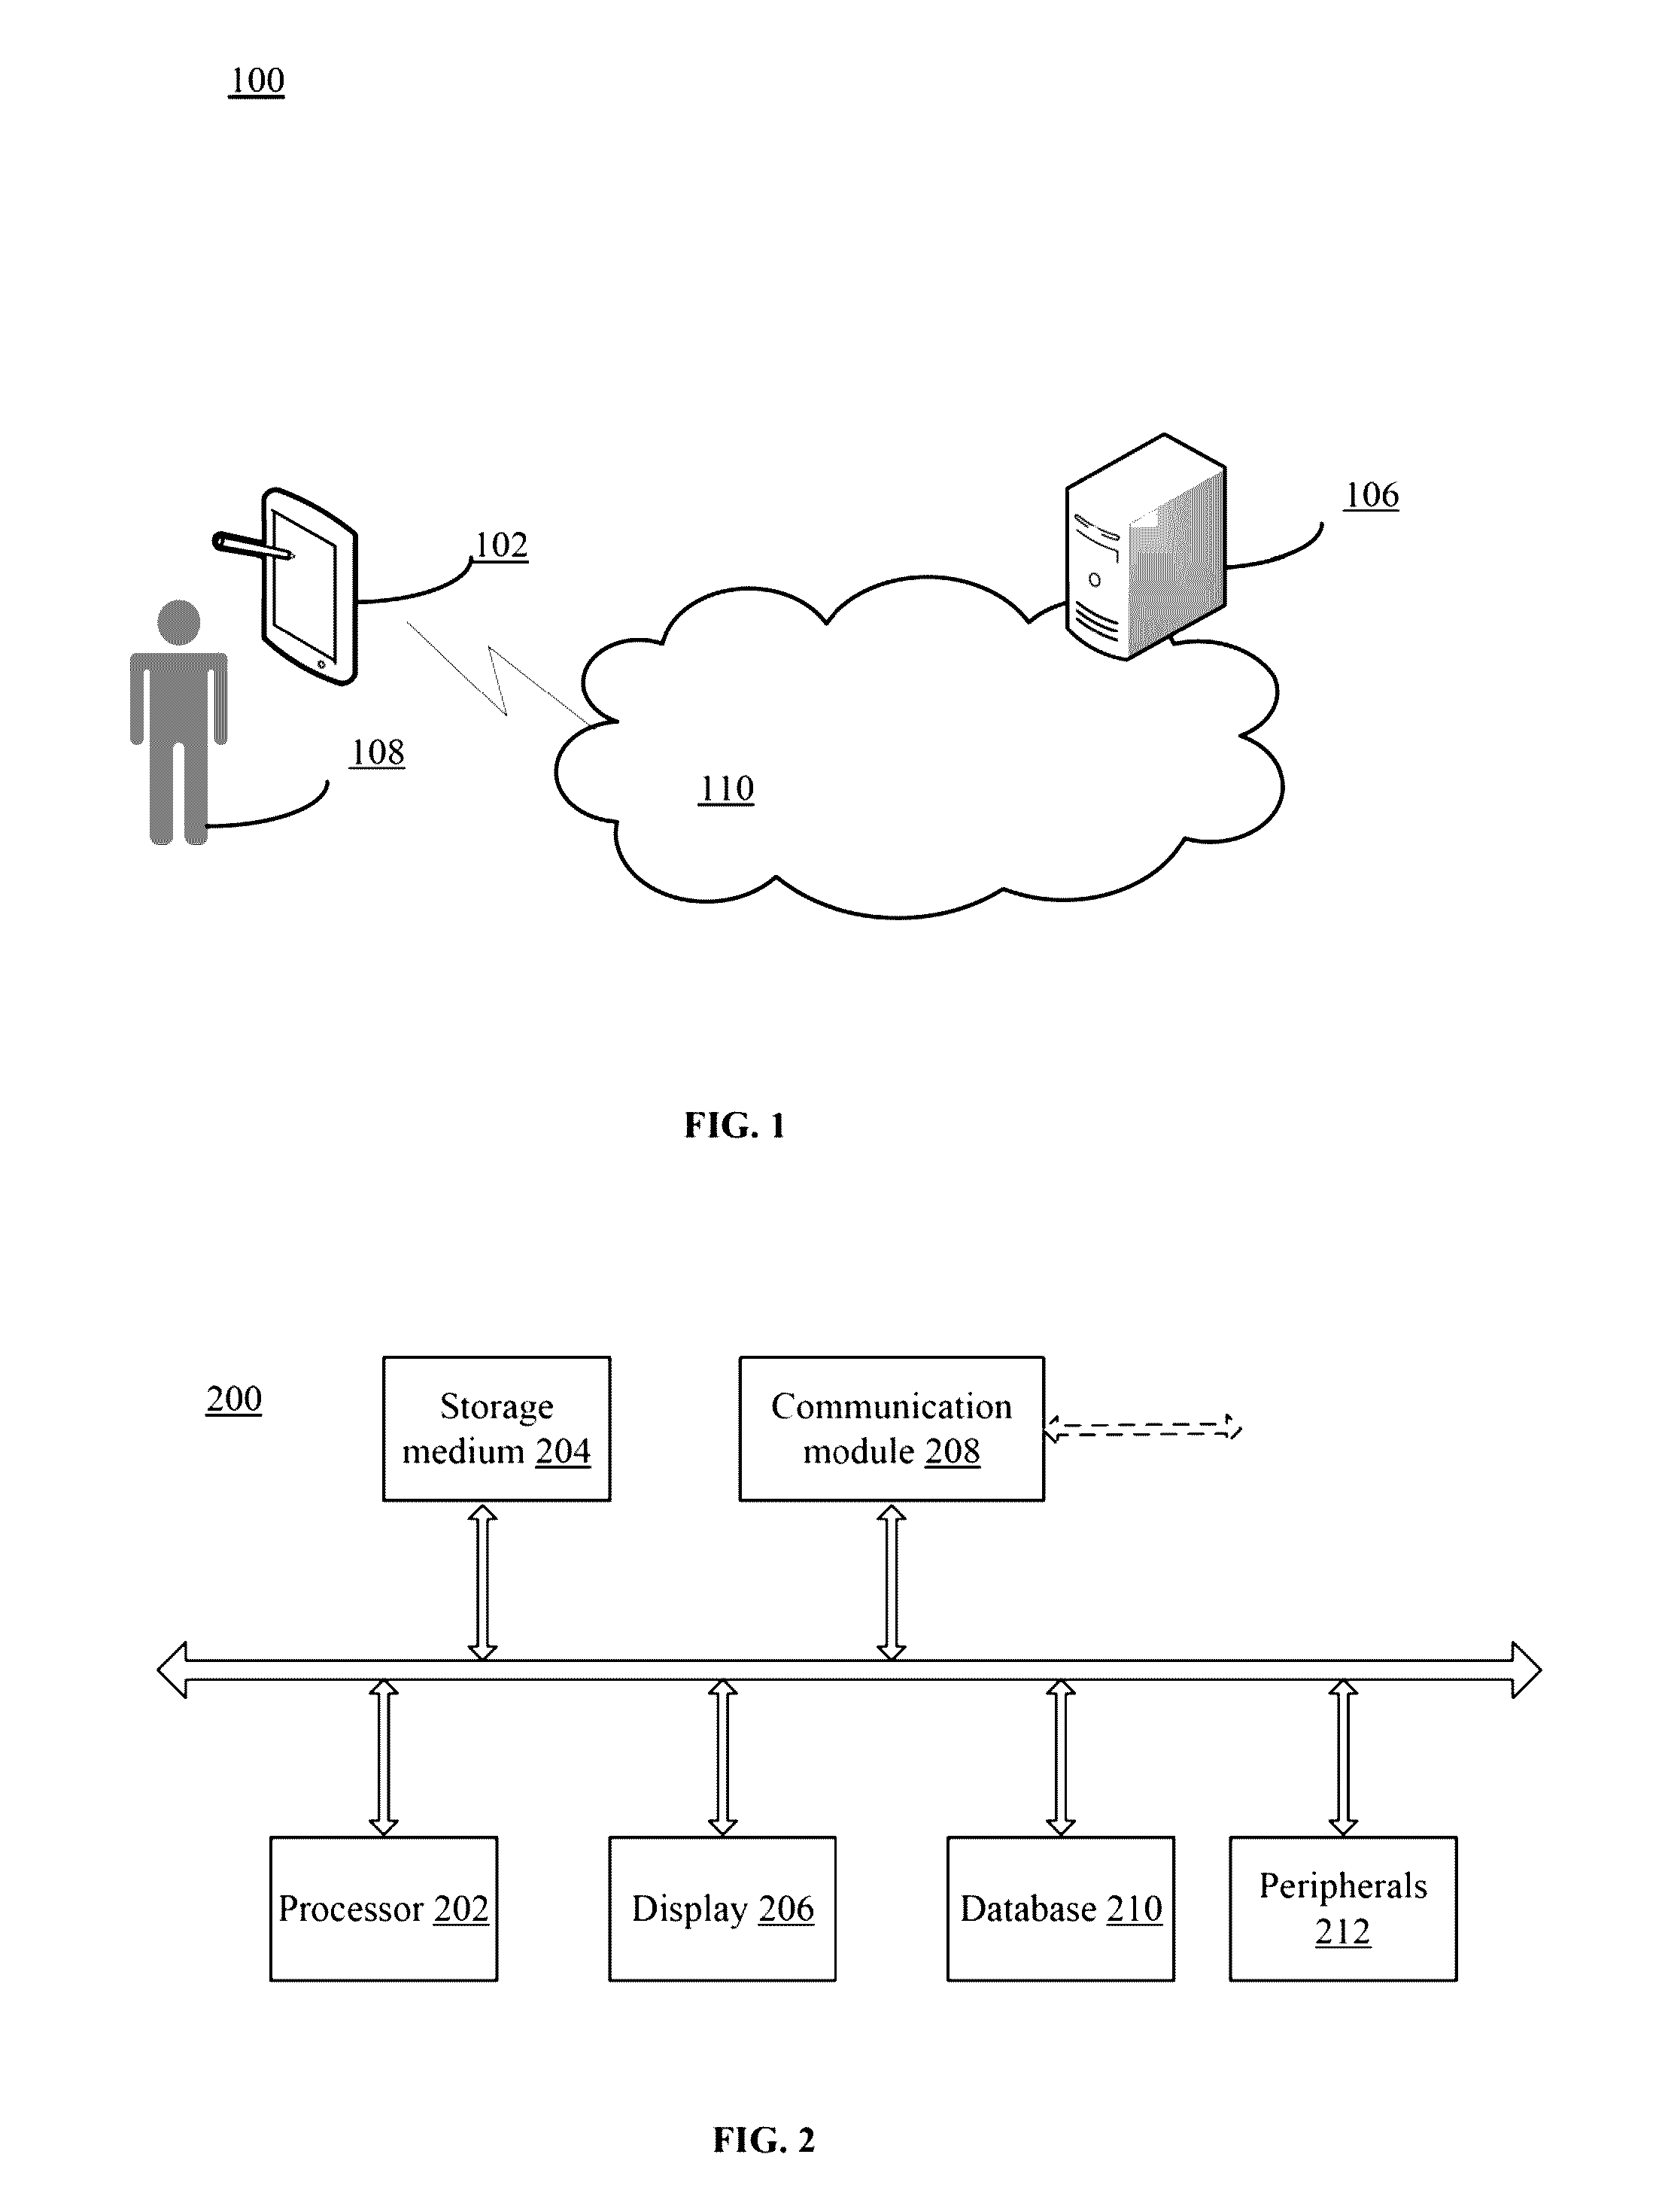 Function-based action sequence derivation for personal assistant system